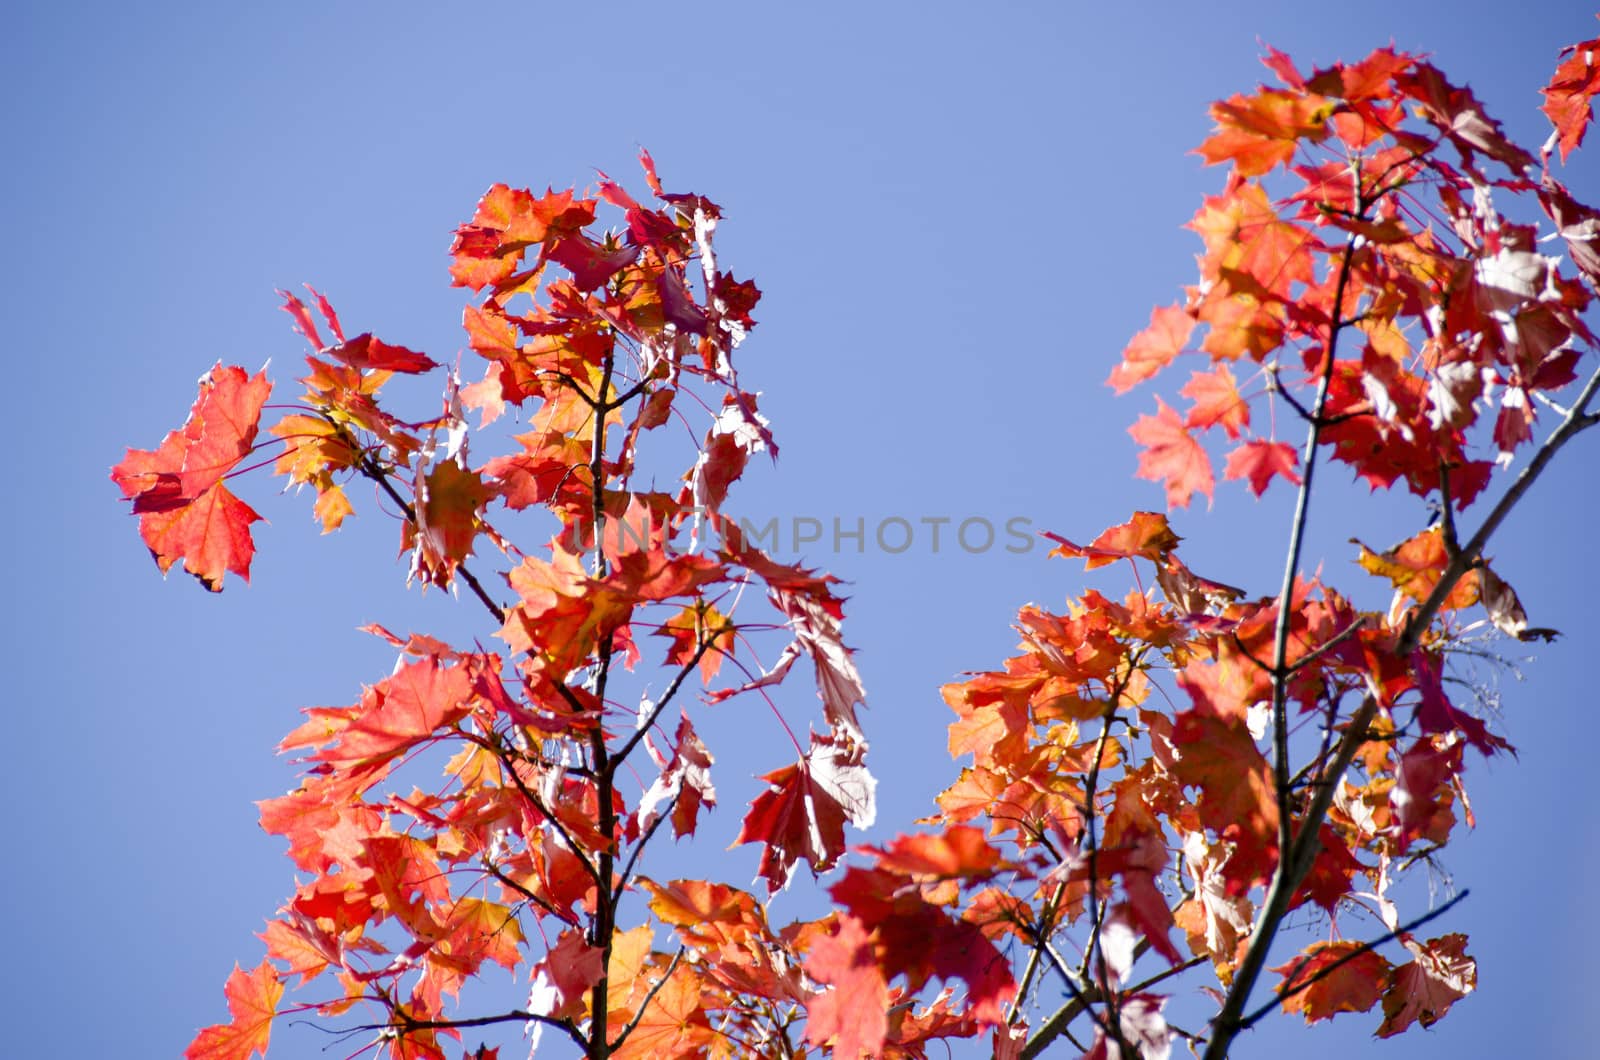 Colorful autumn leaves background by Arrxxx